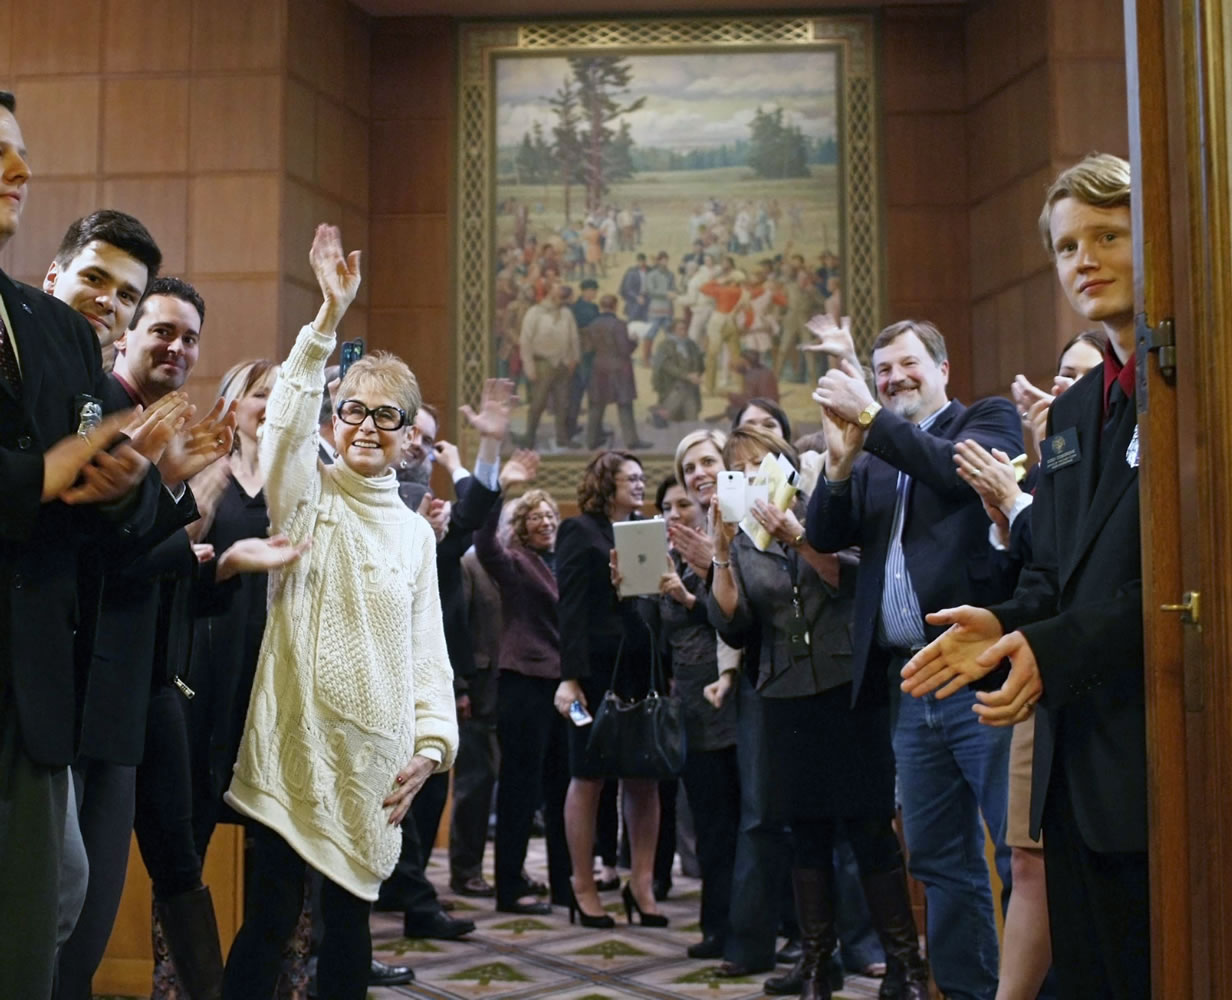 Oregon House members wave across the Capitol to their Senate colleagues at final adjournment Friday in Salem, Ore.